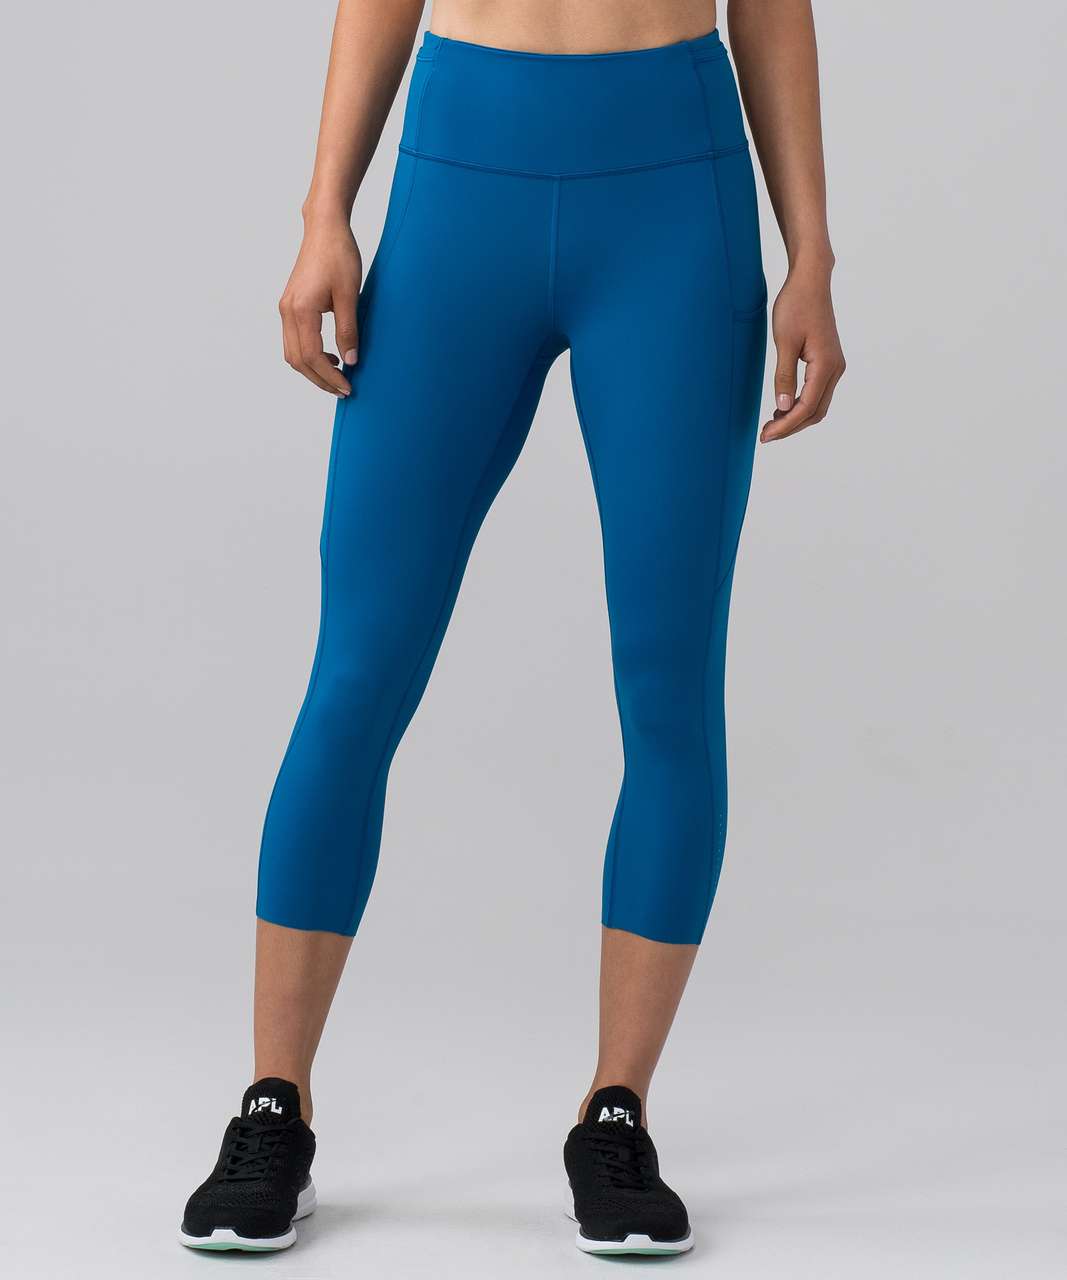 lululemon - Feel fast and free in these barely-there, sweat-wicking run  tights. Made with Nulux™ fabric that's quick-drying, sweat-wicking, and  offers lightweight coverage